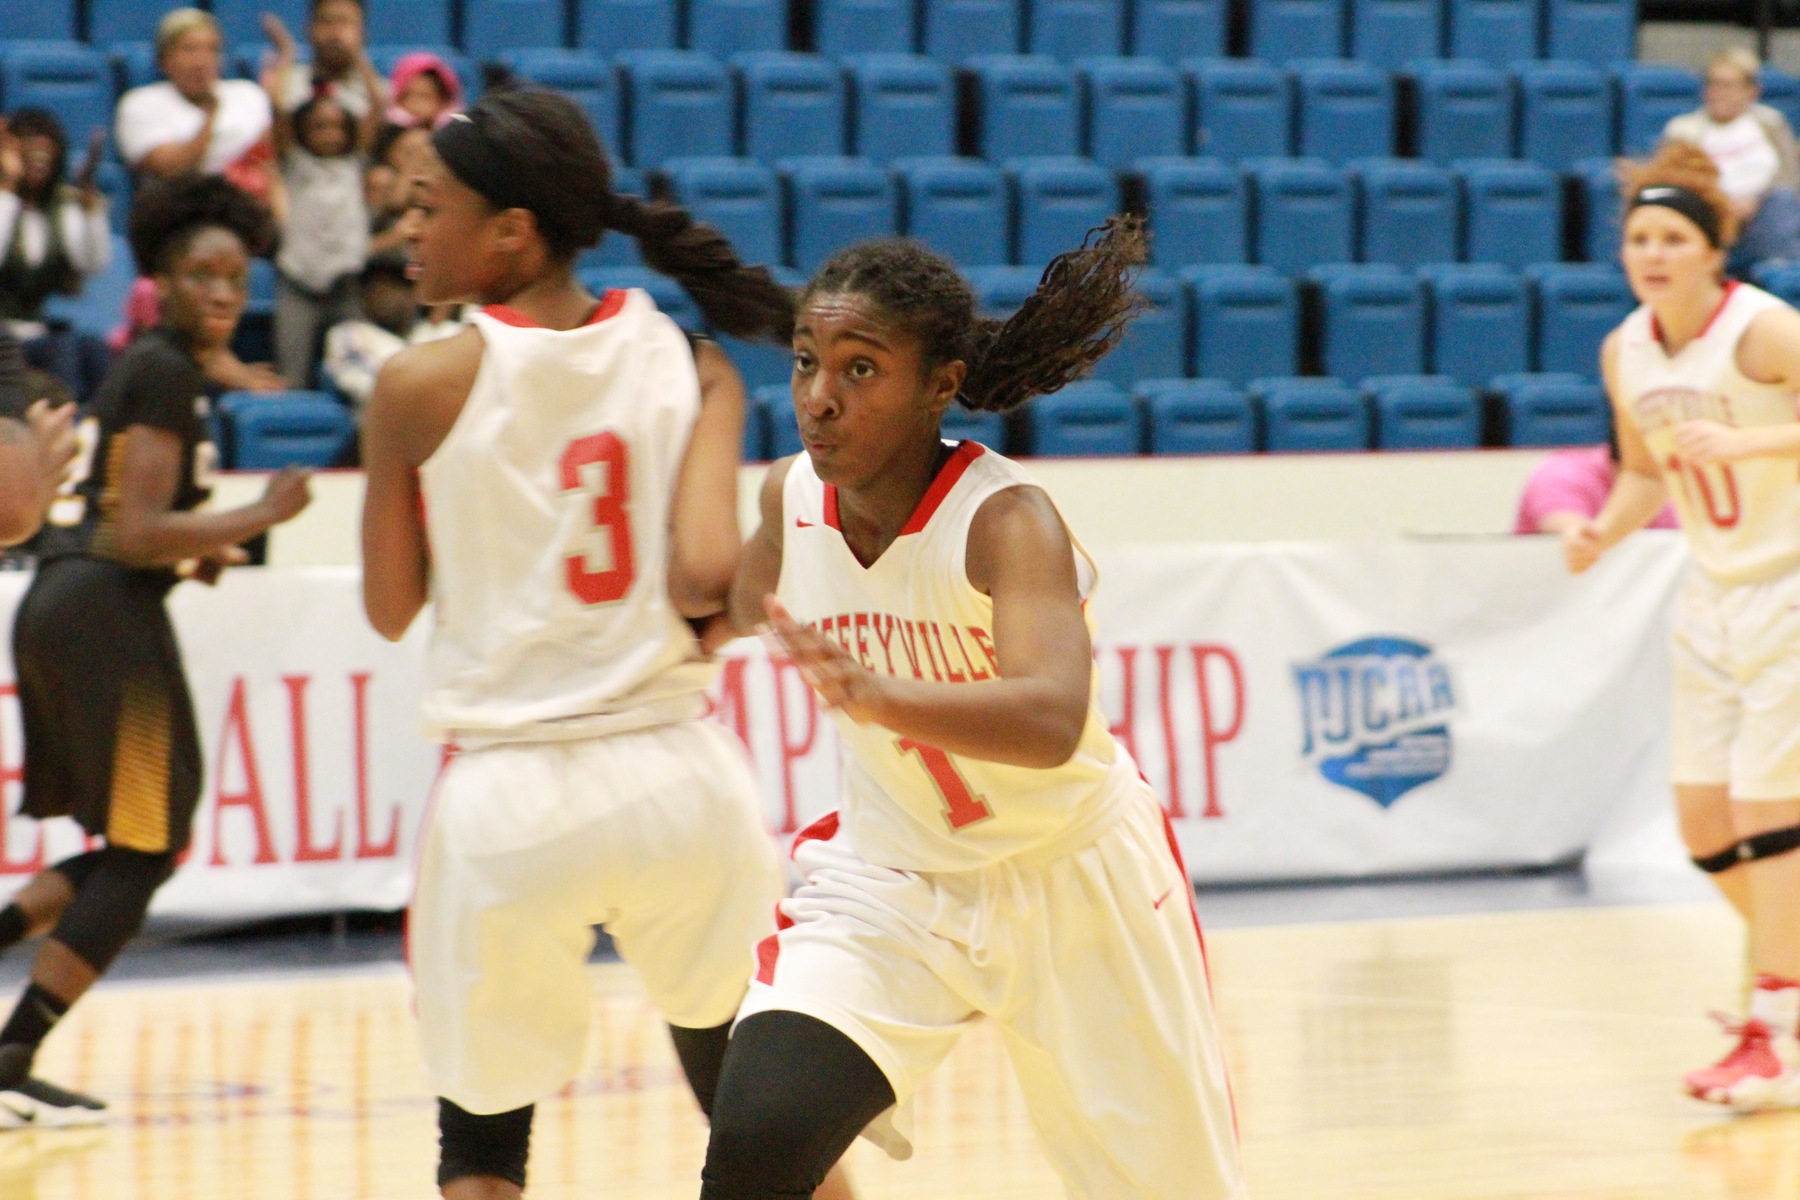 Red Raven Women's Basketball Season Ends with 62-82 Loss to Cloud in Region VI Quarterfinals